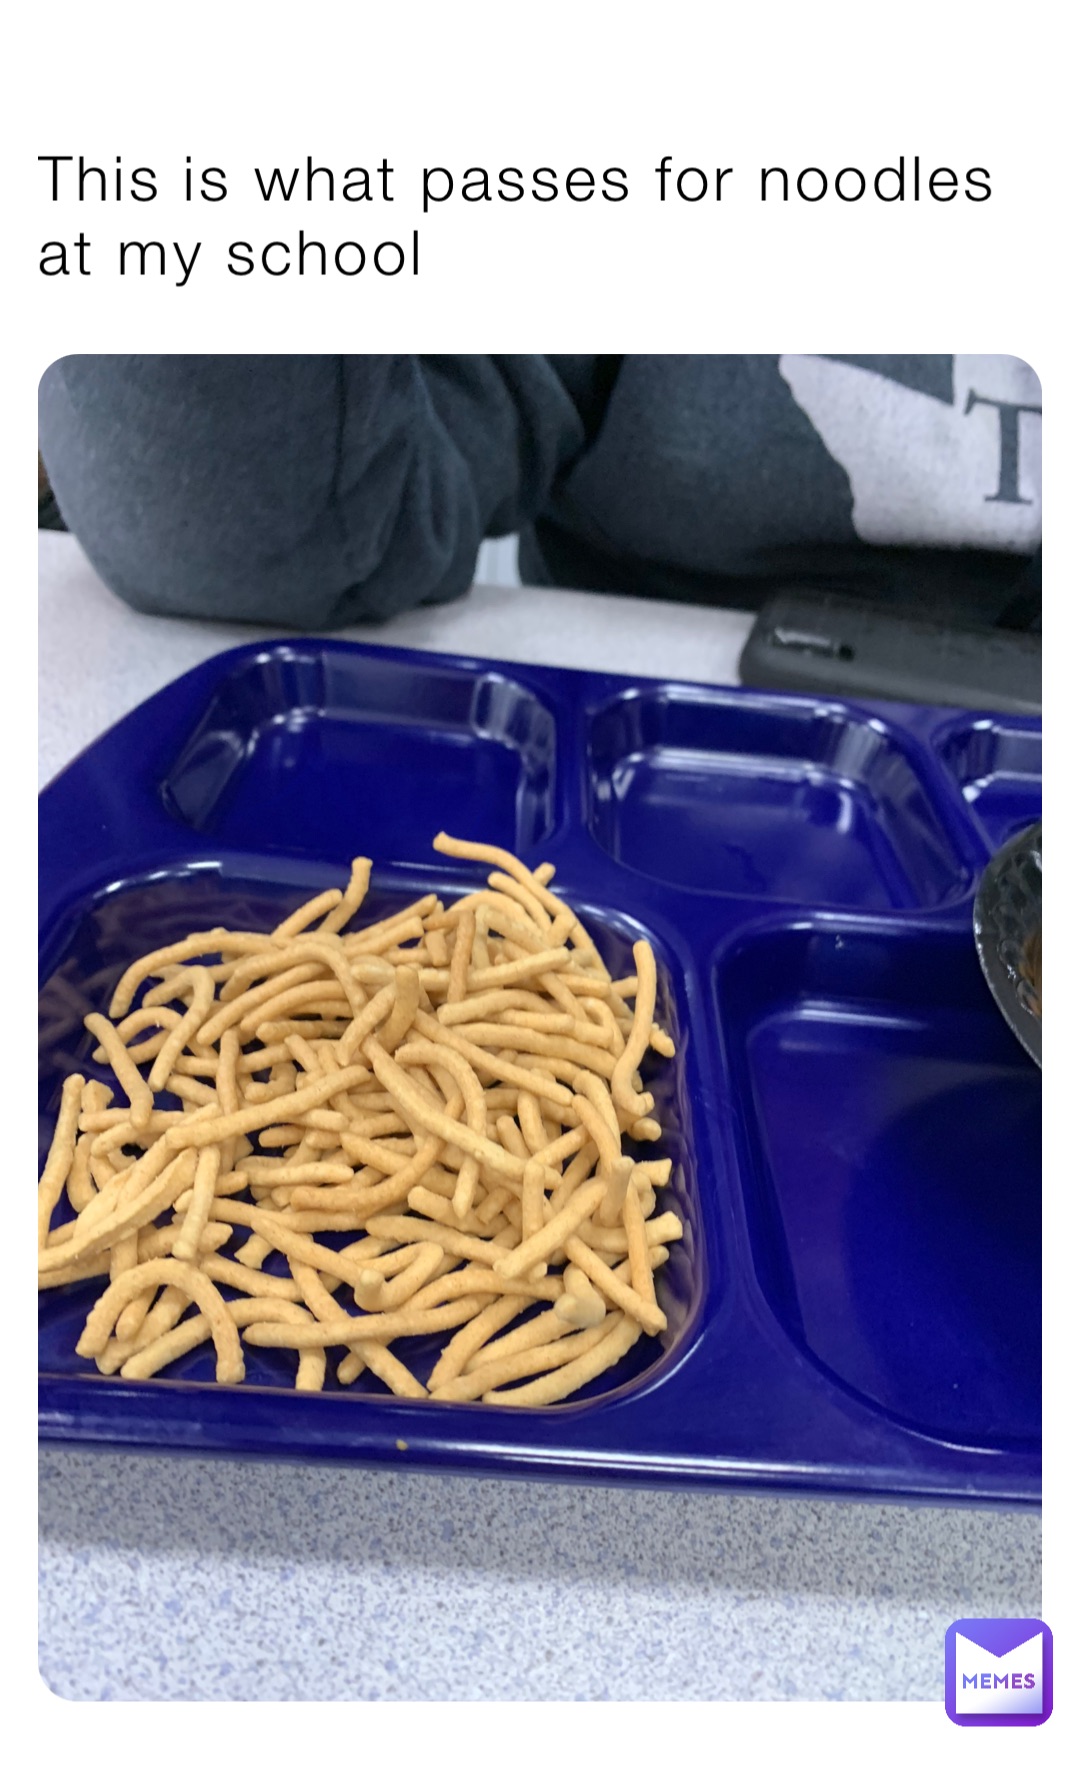 This is what passes for noodles at my school